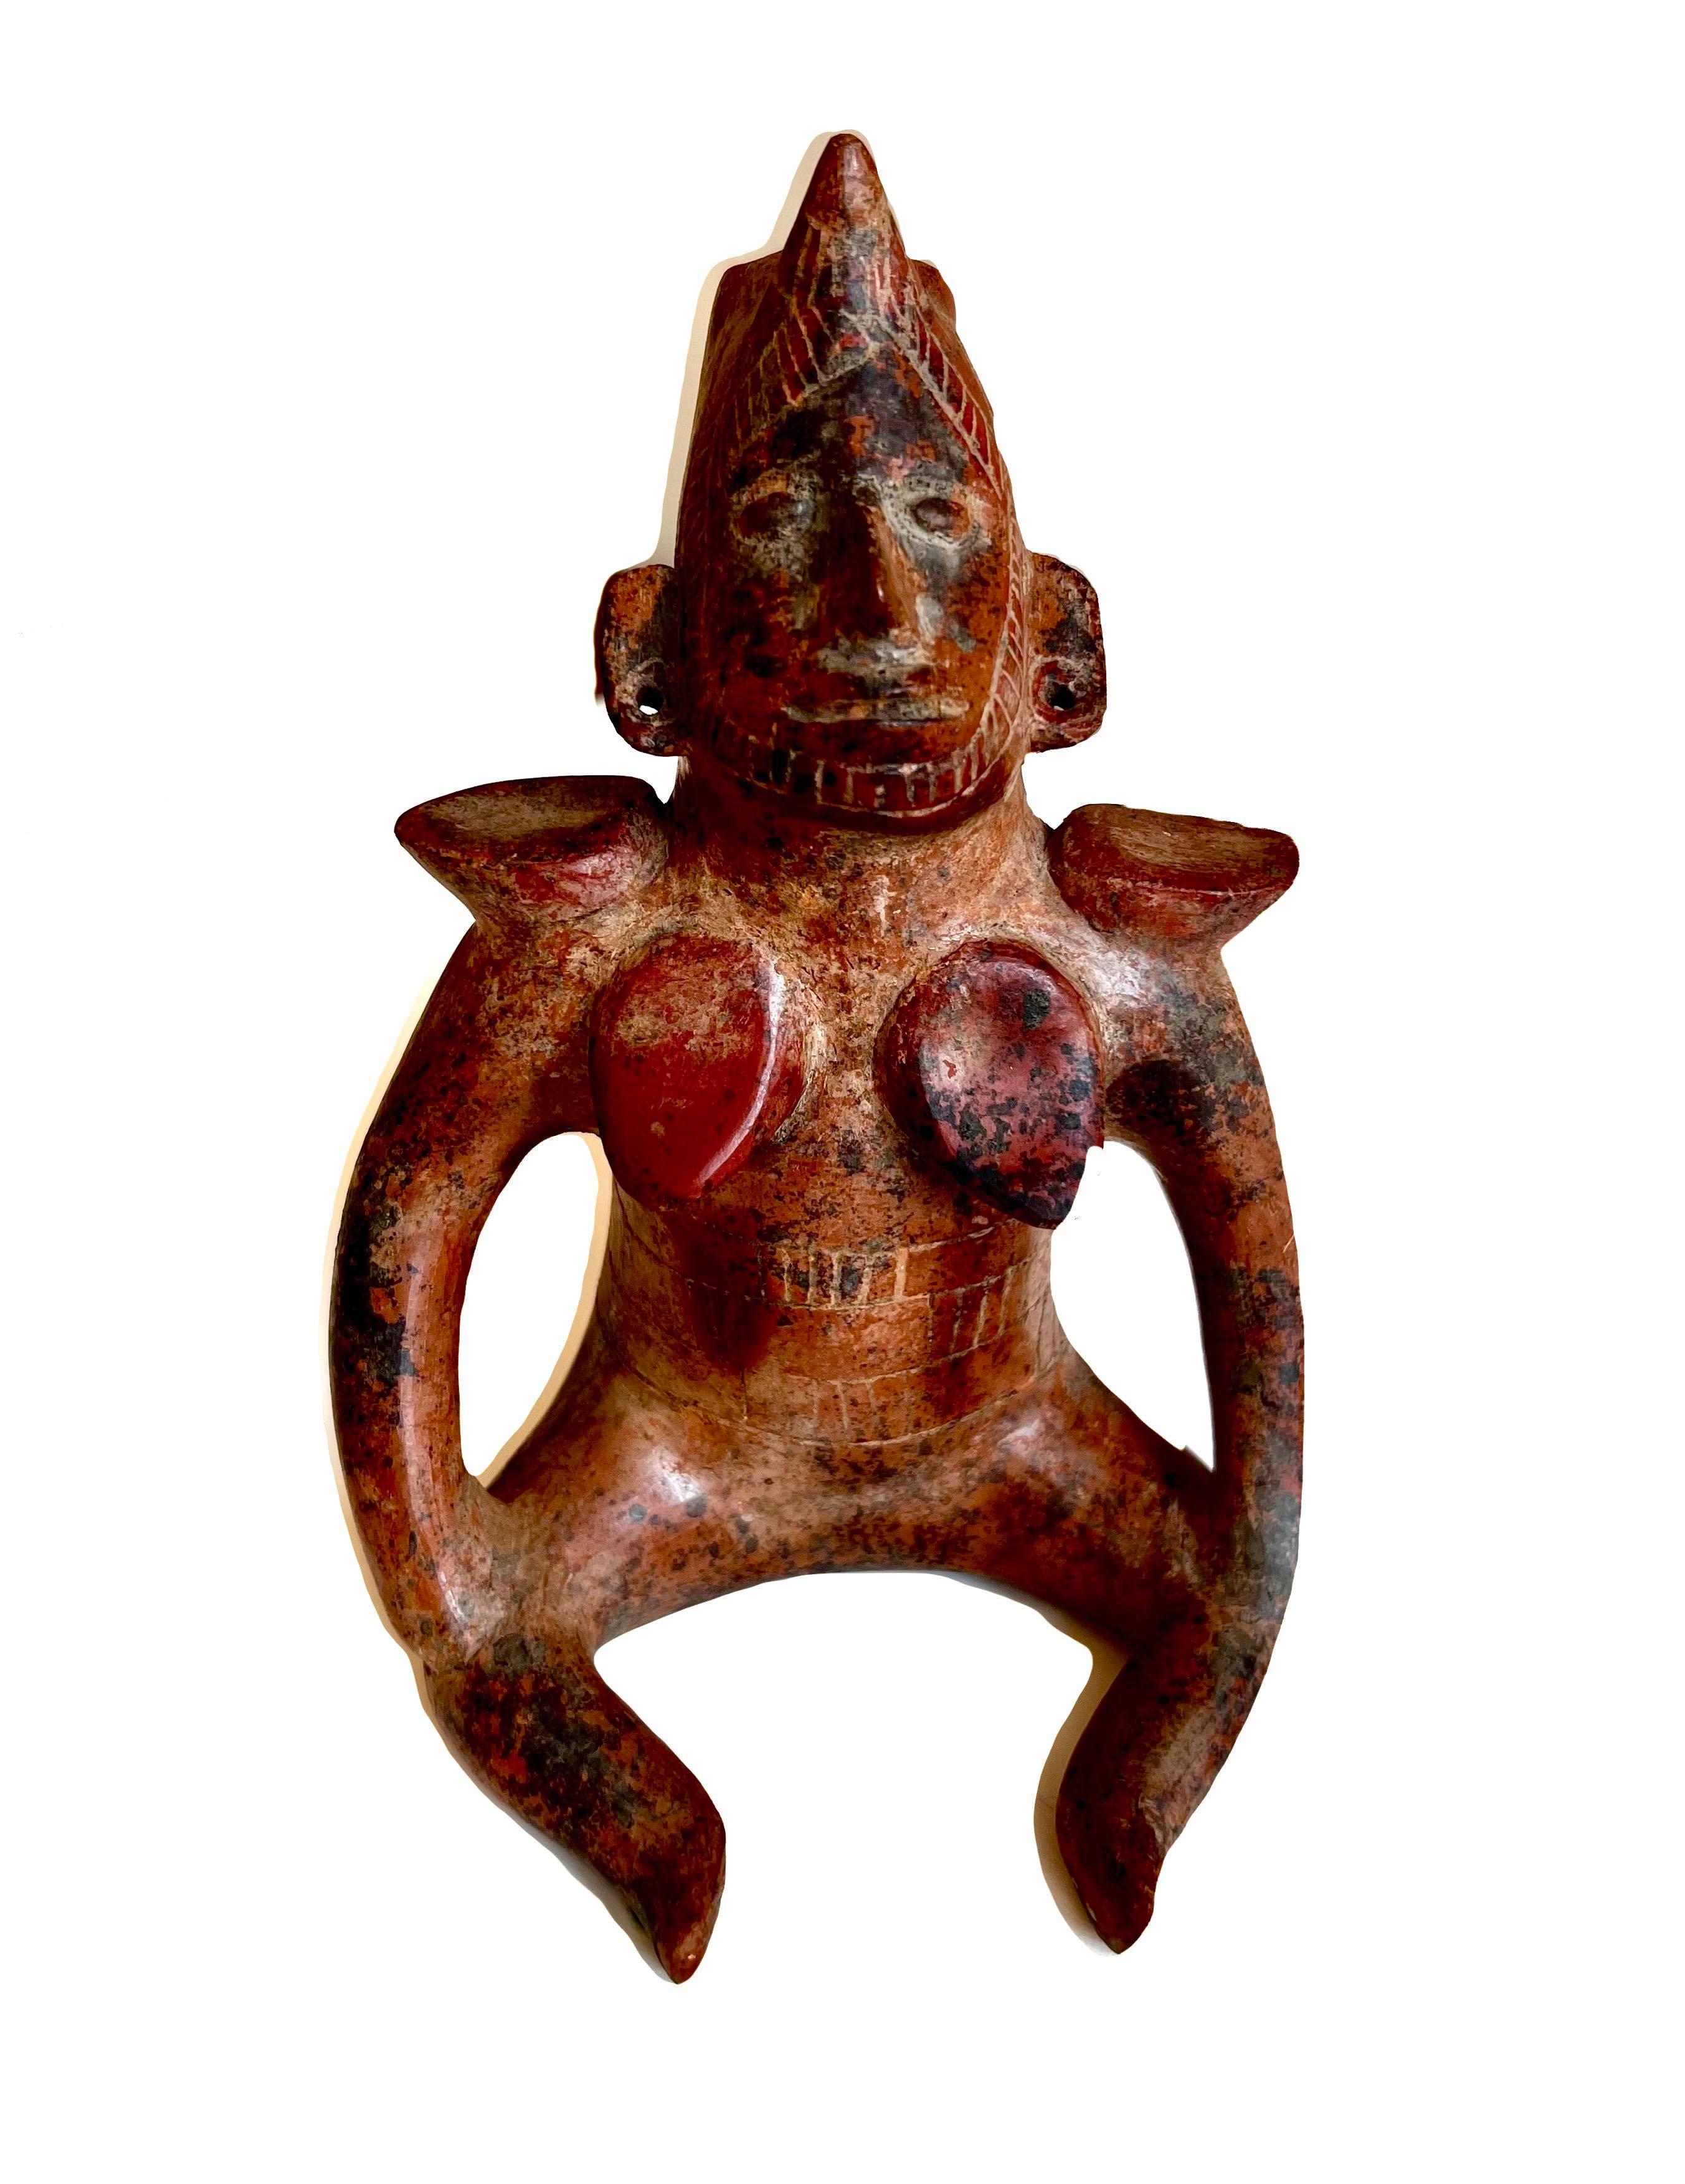 Clay Sculpture in Pre-Colombian Style Reproduction - Art by Unknown